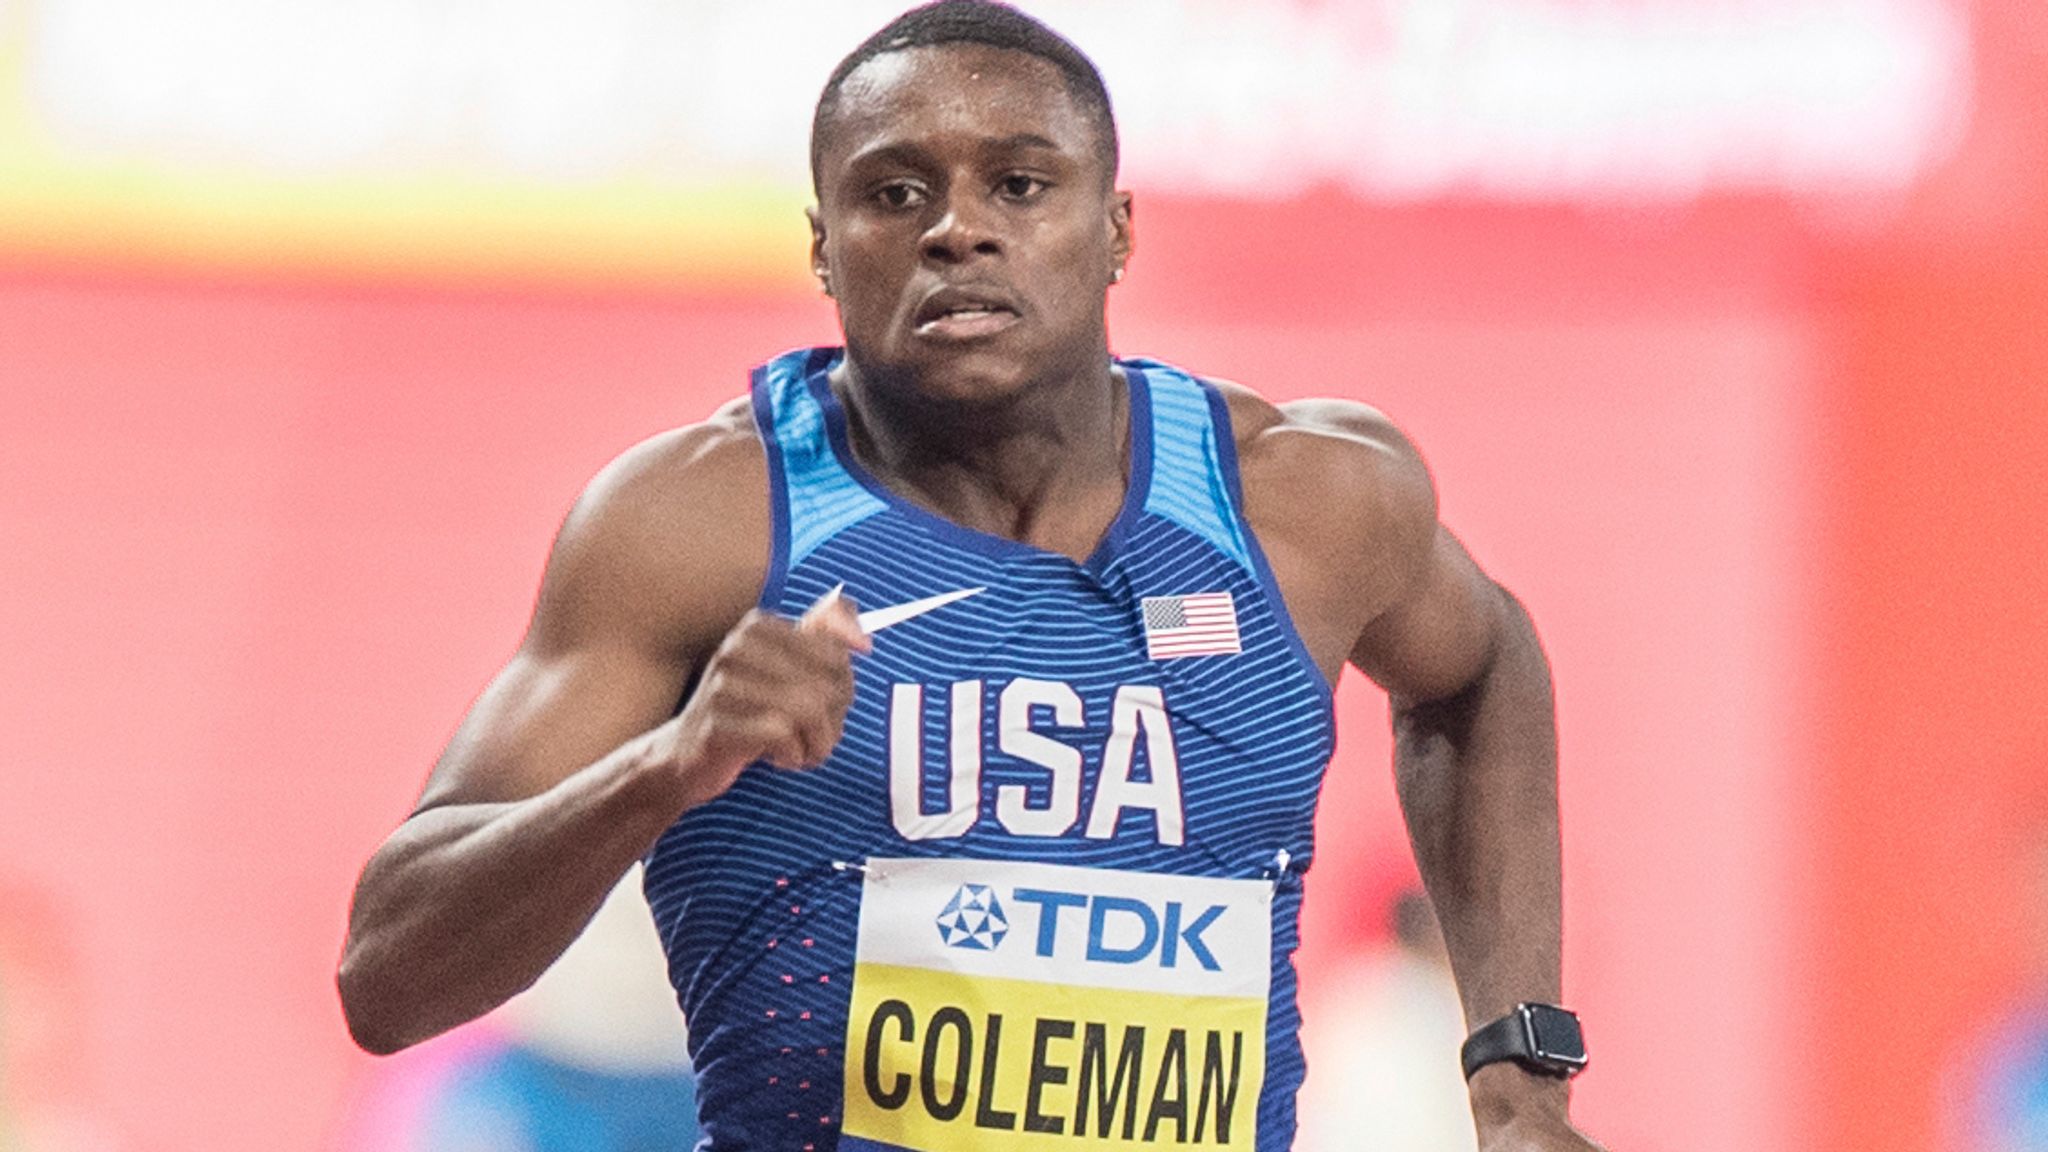 Christian Coleman: 100m world champion has ban reduced but will still miss  Olympic Games | Olympics News | Sky Sports